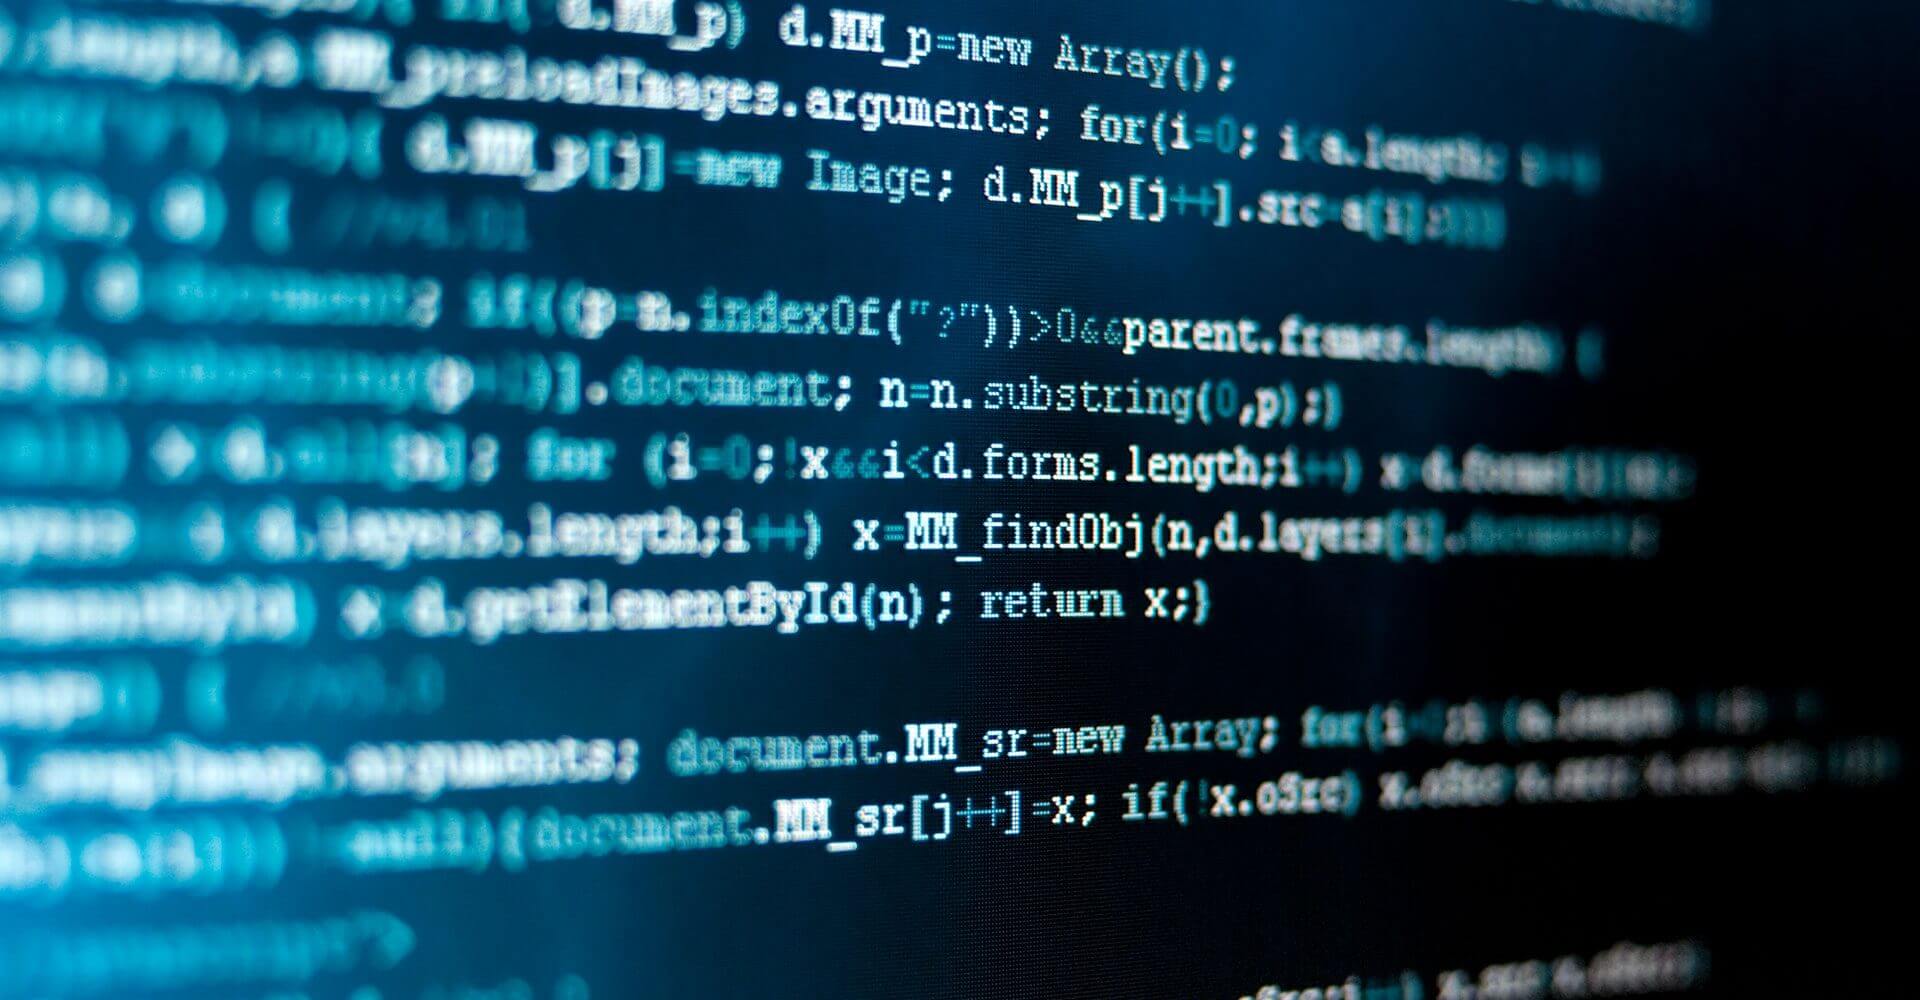 A clipping of code is revealed, potentially revealing distorted valuations.